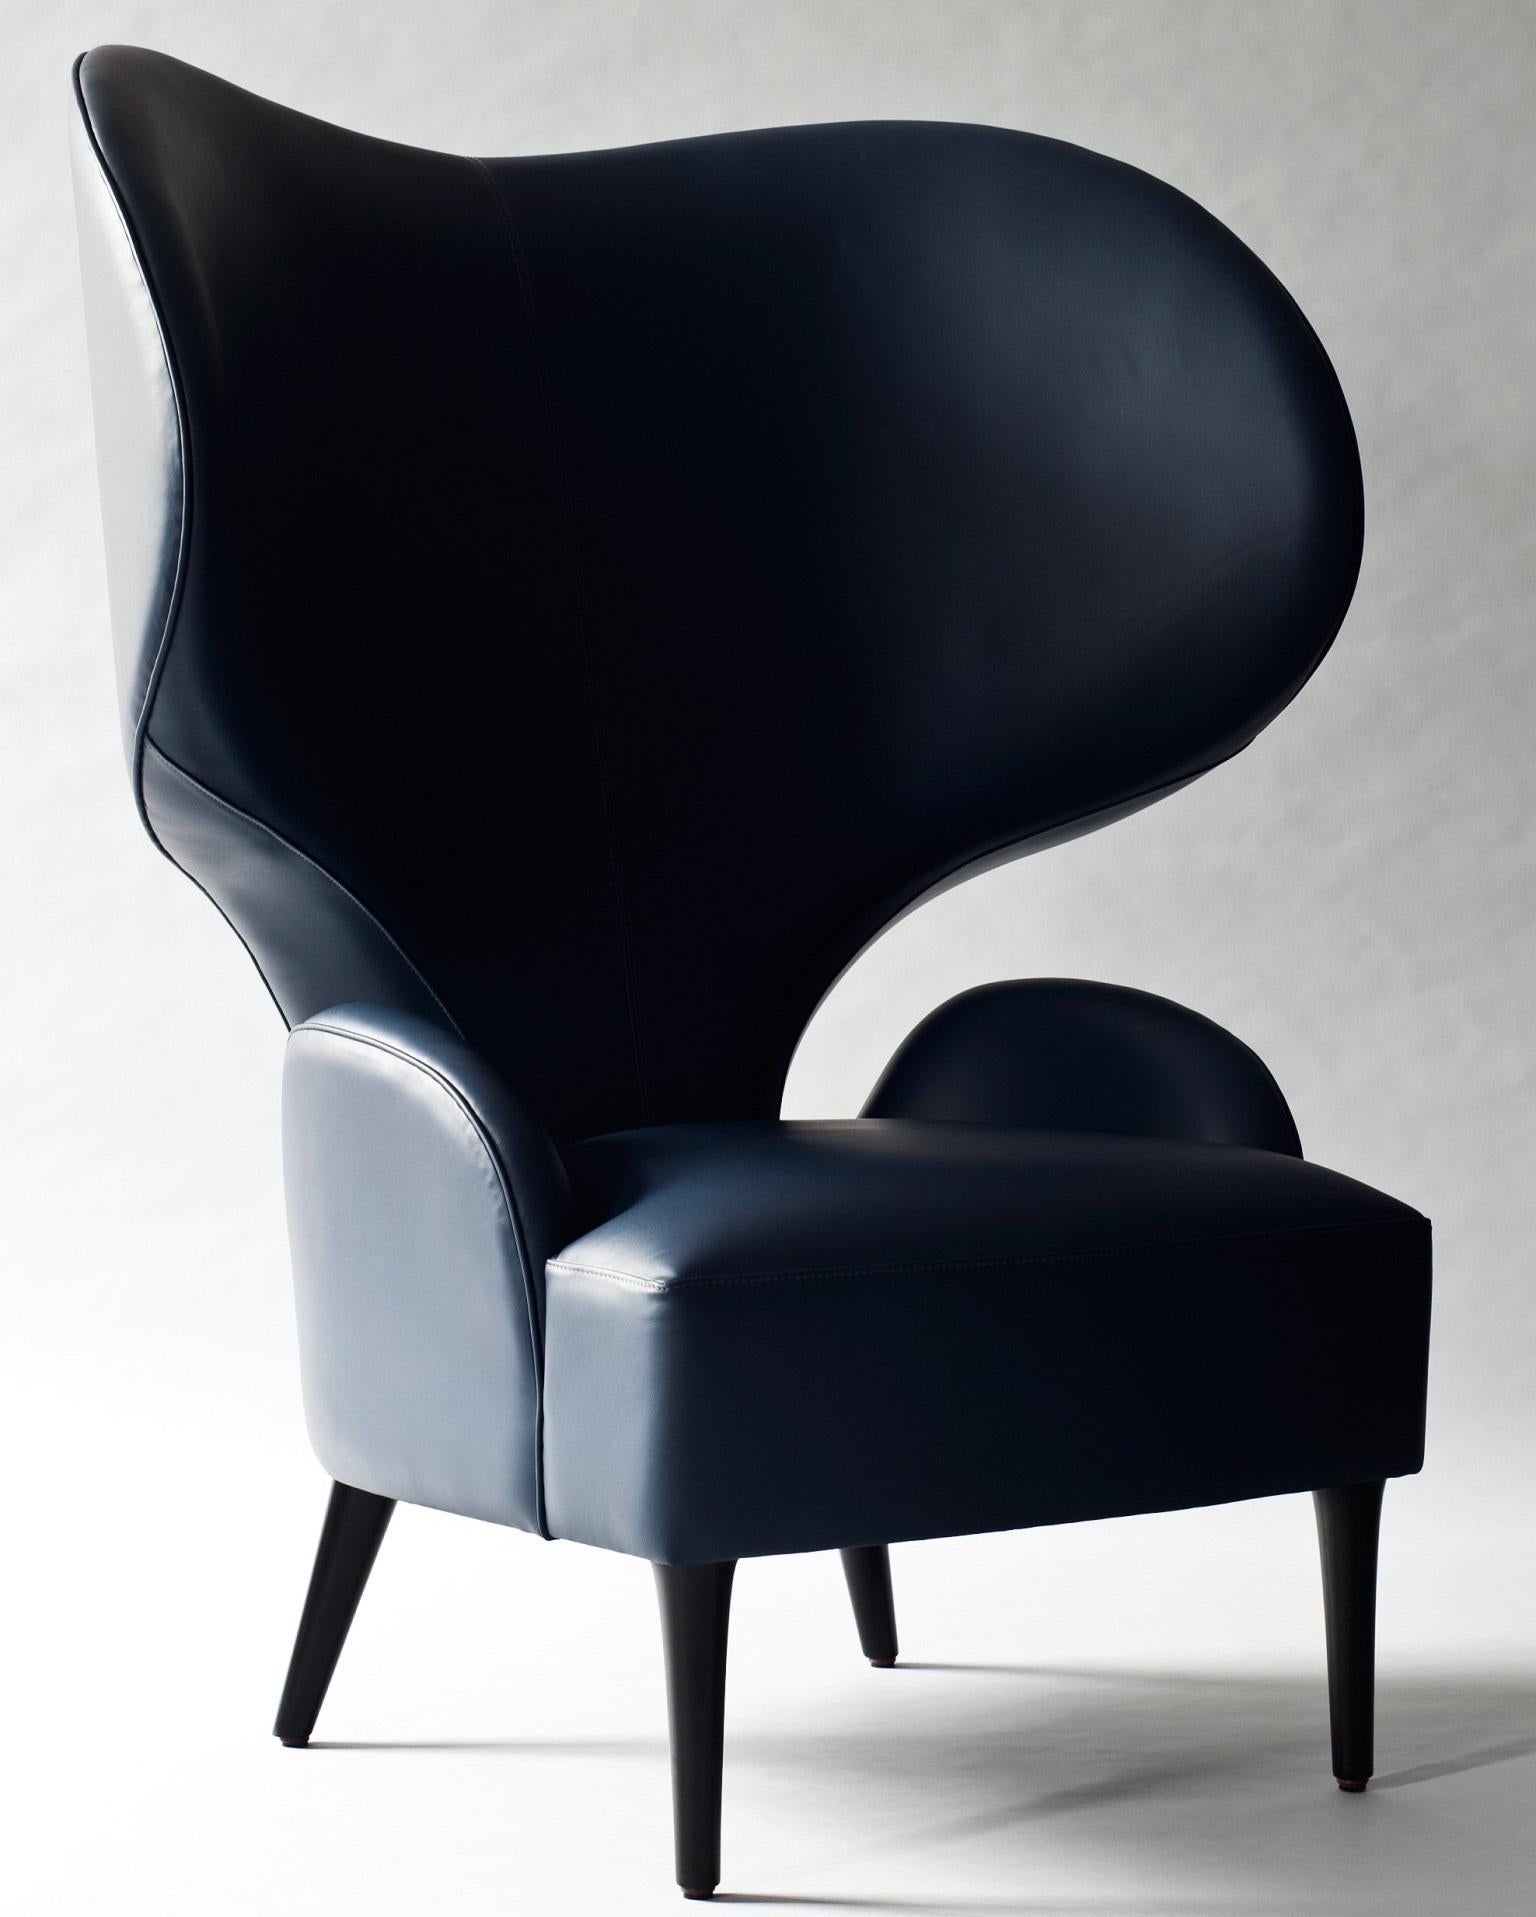 The Hathi side or lounge chair by DeMuro Das features an elegant winged back and generous proportions. The fully upholstered tight seat and back are supported by black lacquered wood legs.

Pricing is quoted COM - does not include fabric costs.